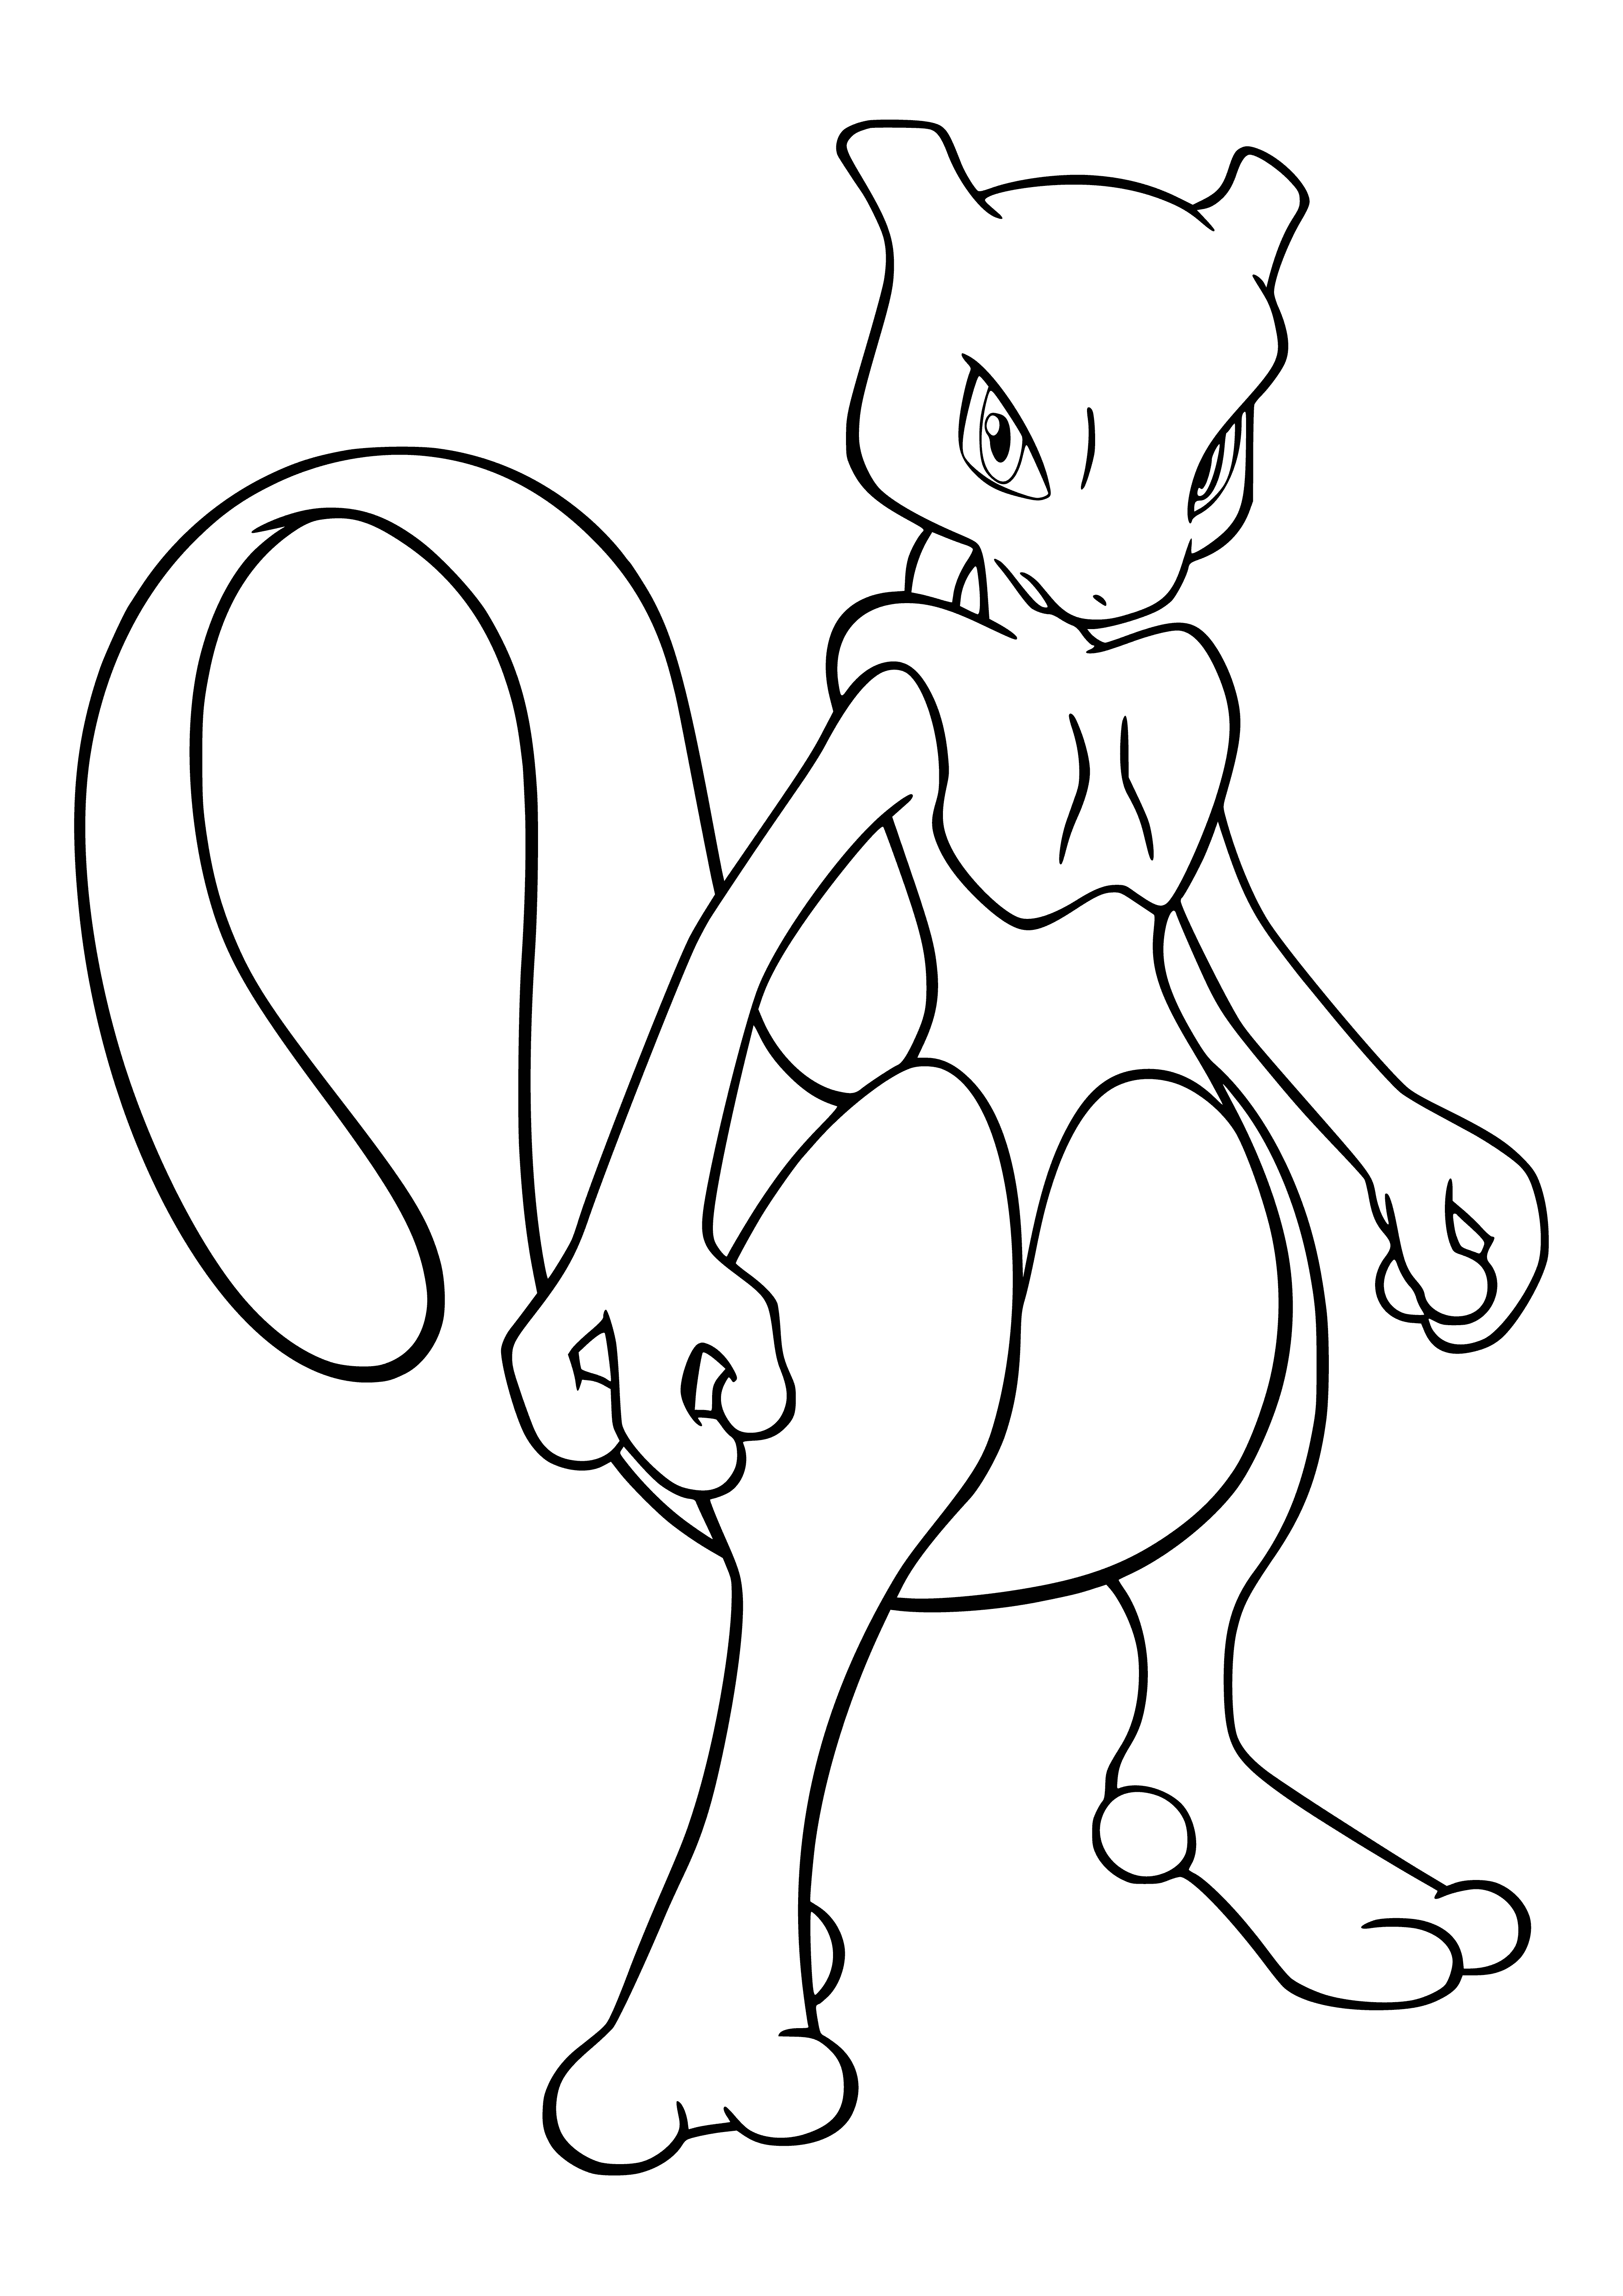 coloring page: Mewtwo: Large Pokemon w/ blue fur & crimson eyes, pointed ears, crest, long legs, thin tail, and 3-fingered hands.